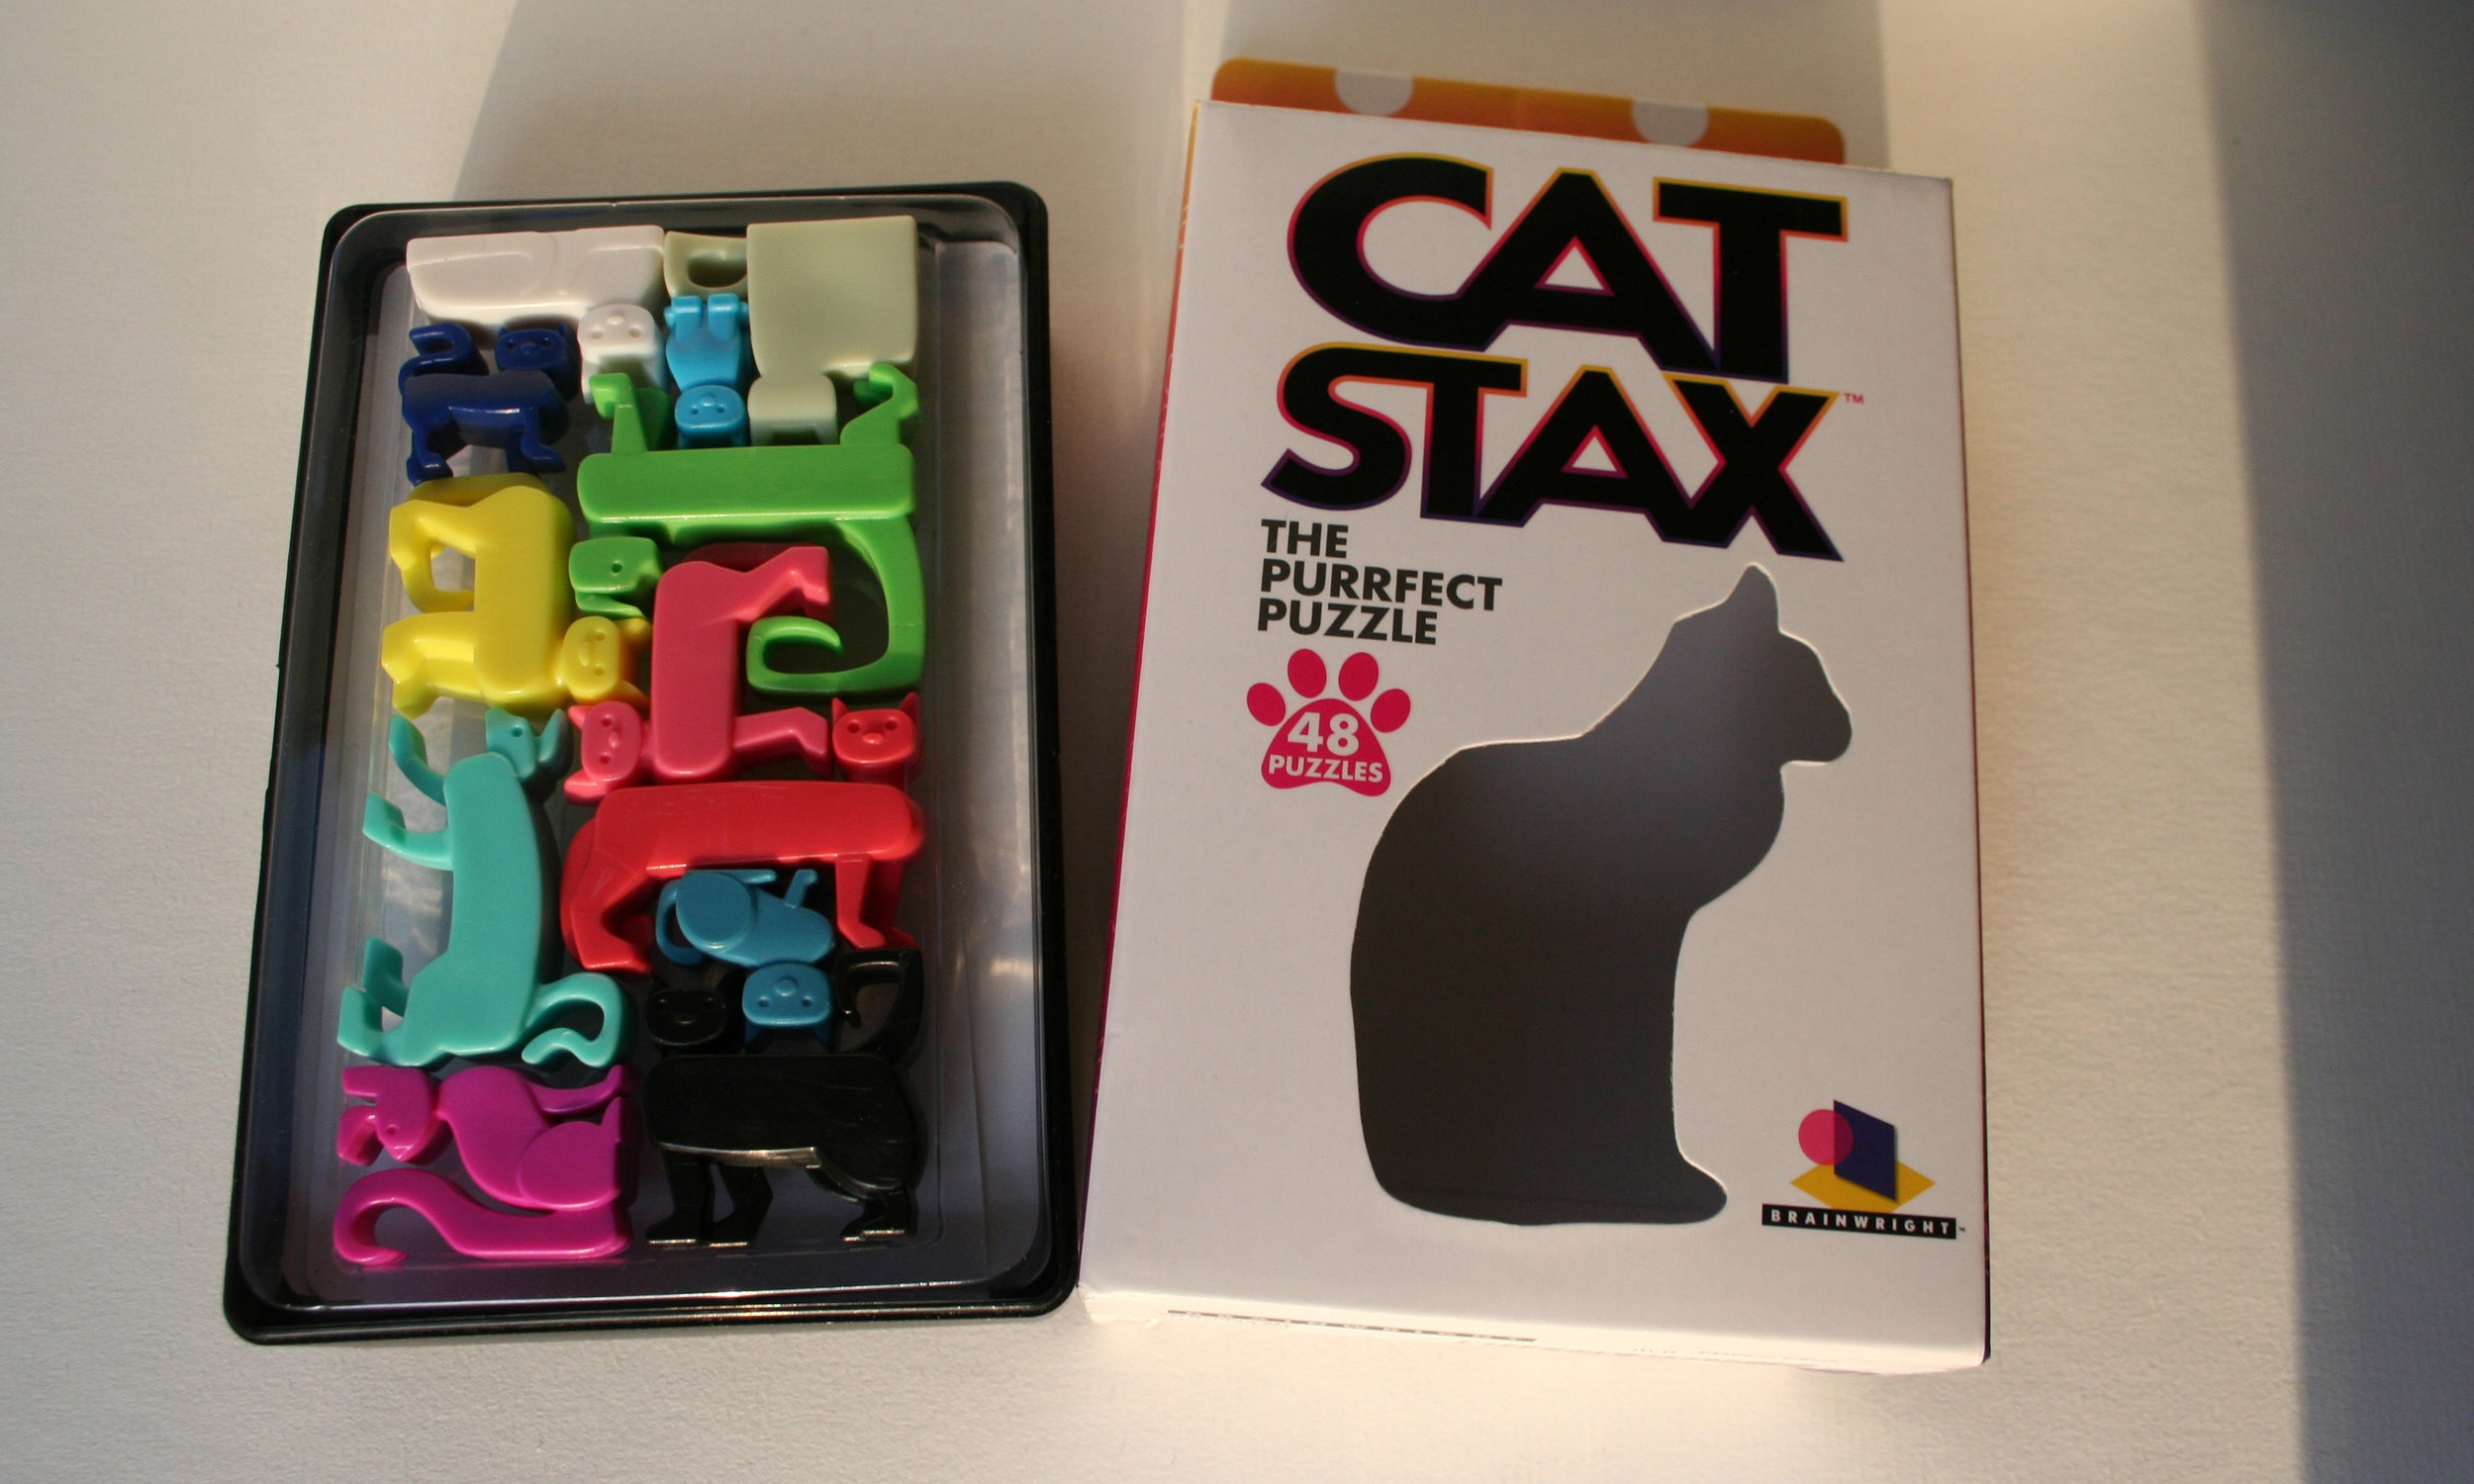 BRAINWRIGHT CAT STAX  THE PURRFECT  PUZZLE  48 DIFFERENT PUZZLES   New 